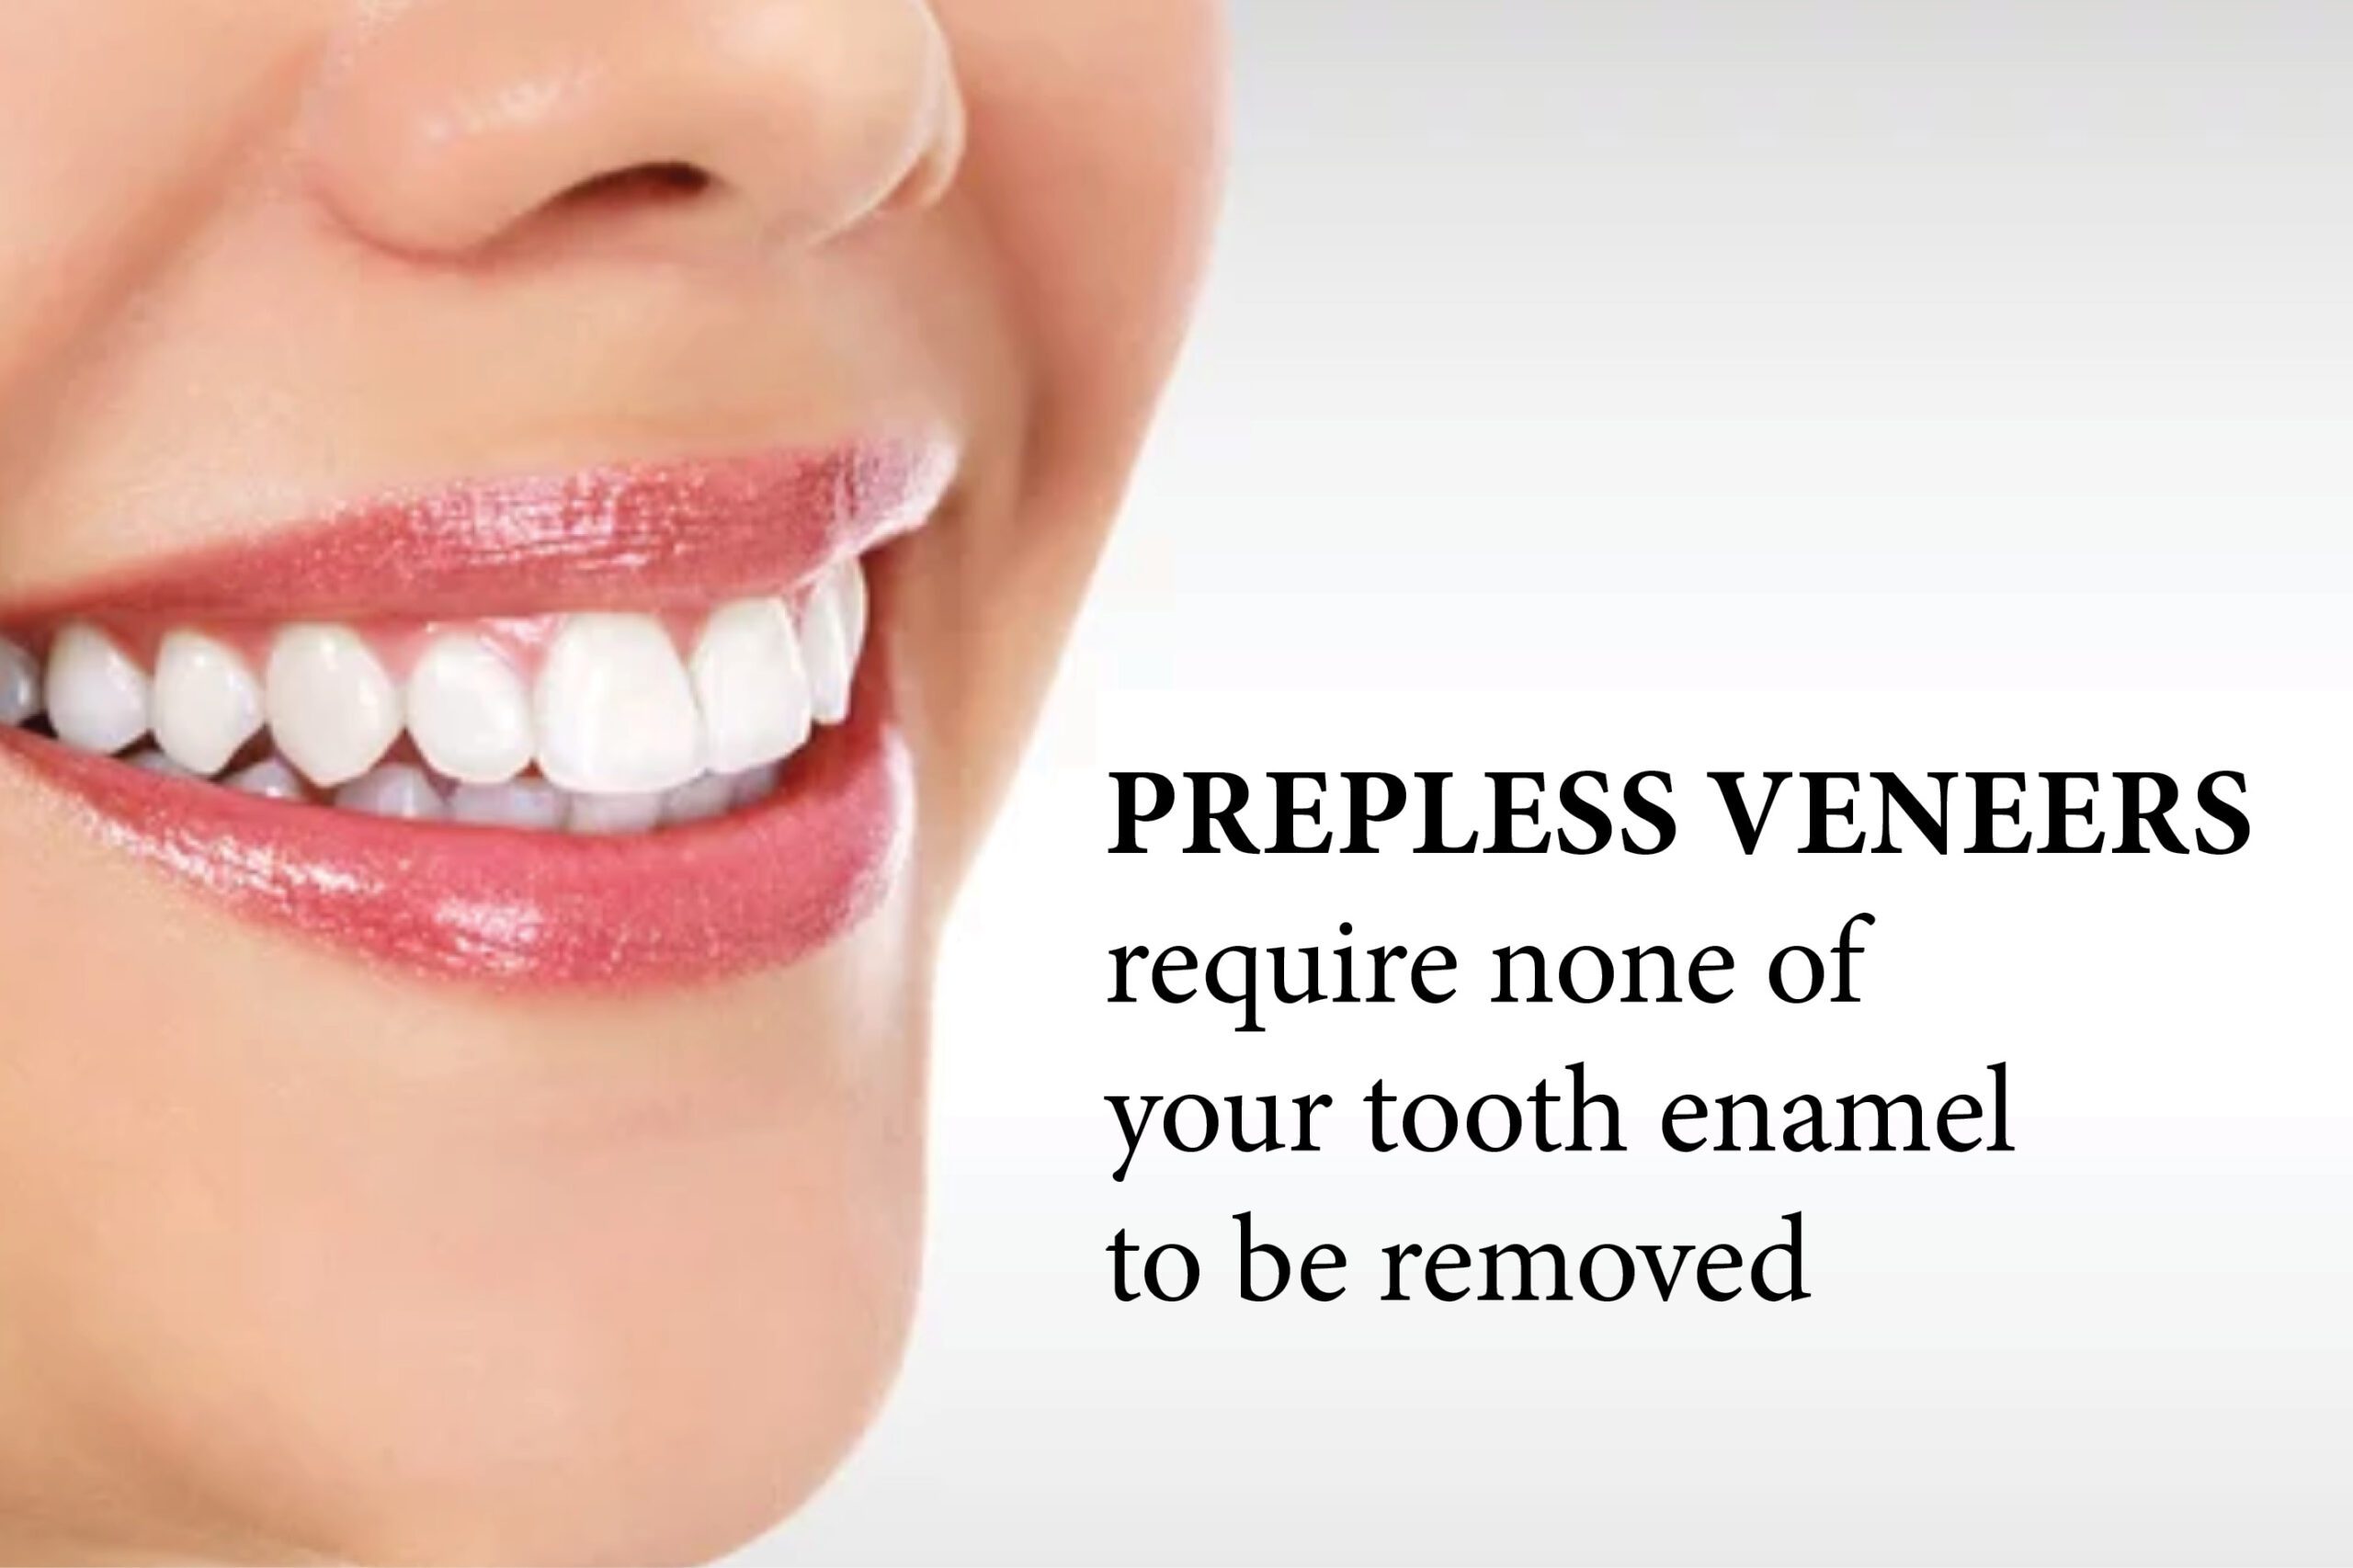 prepless veneers - no tooth removed